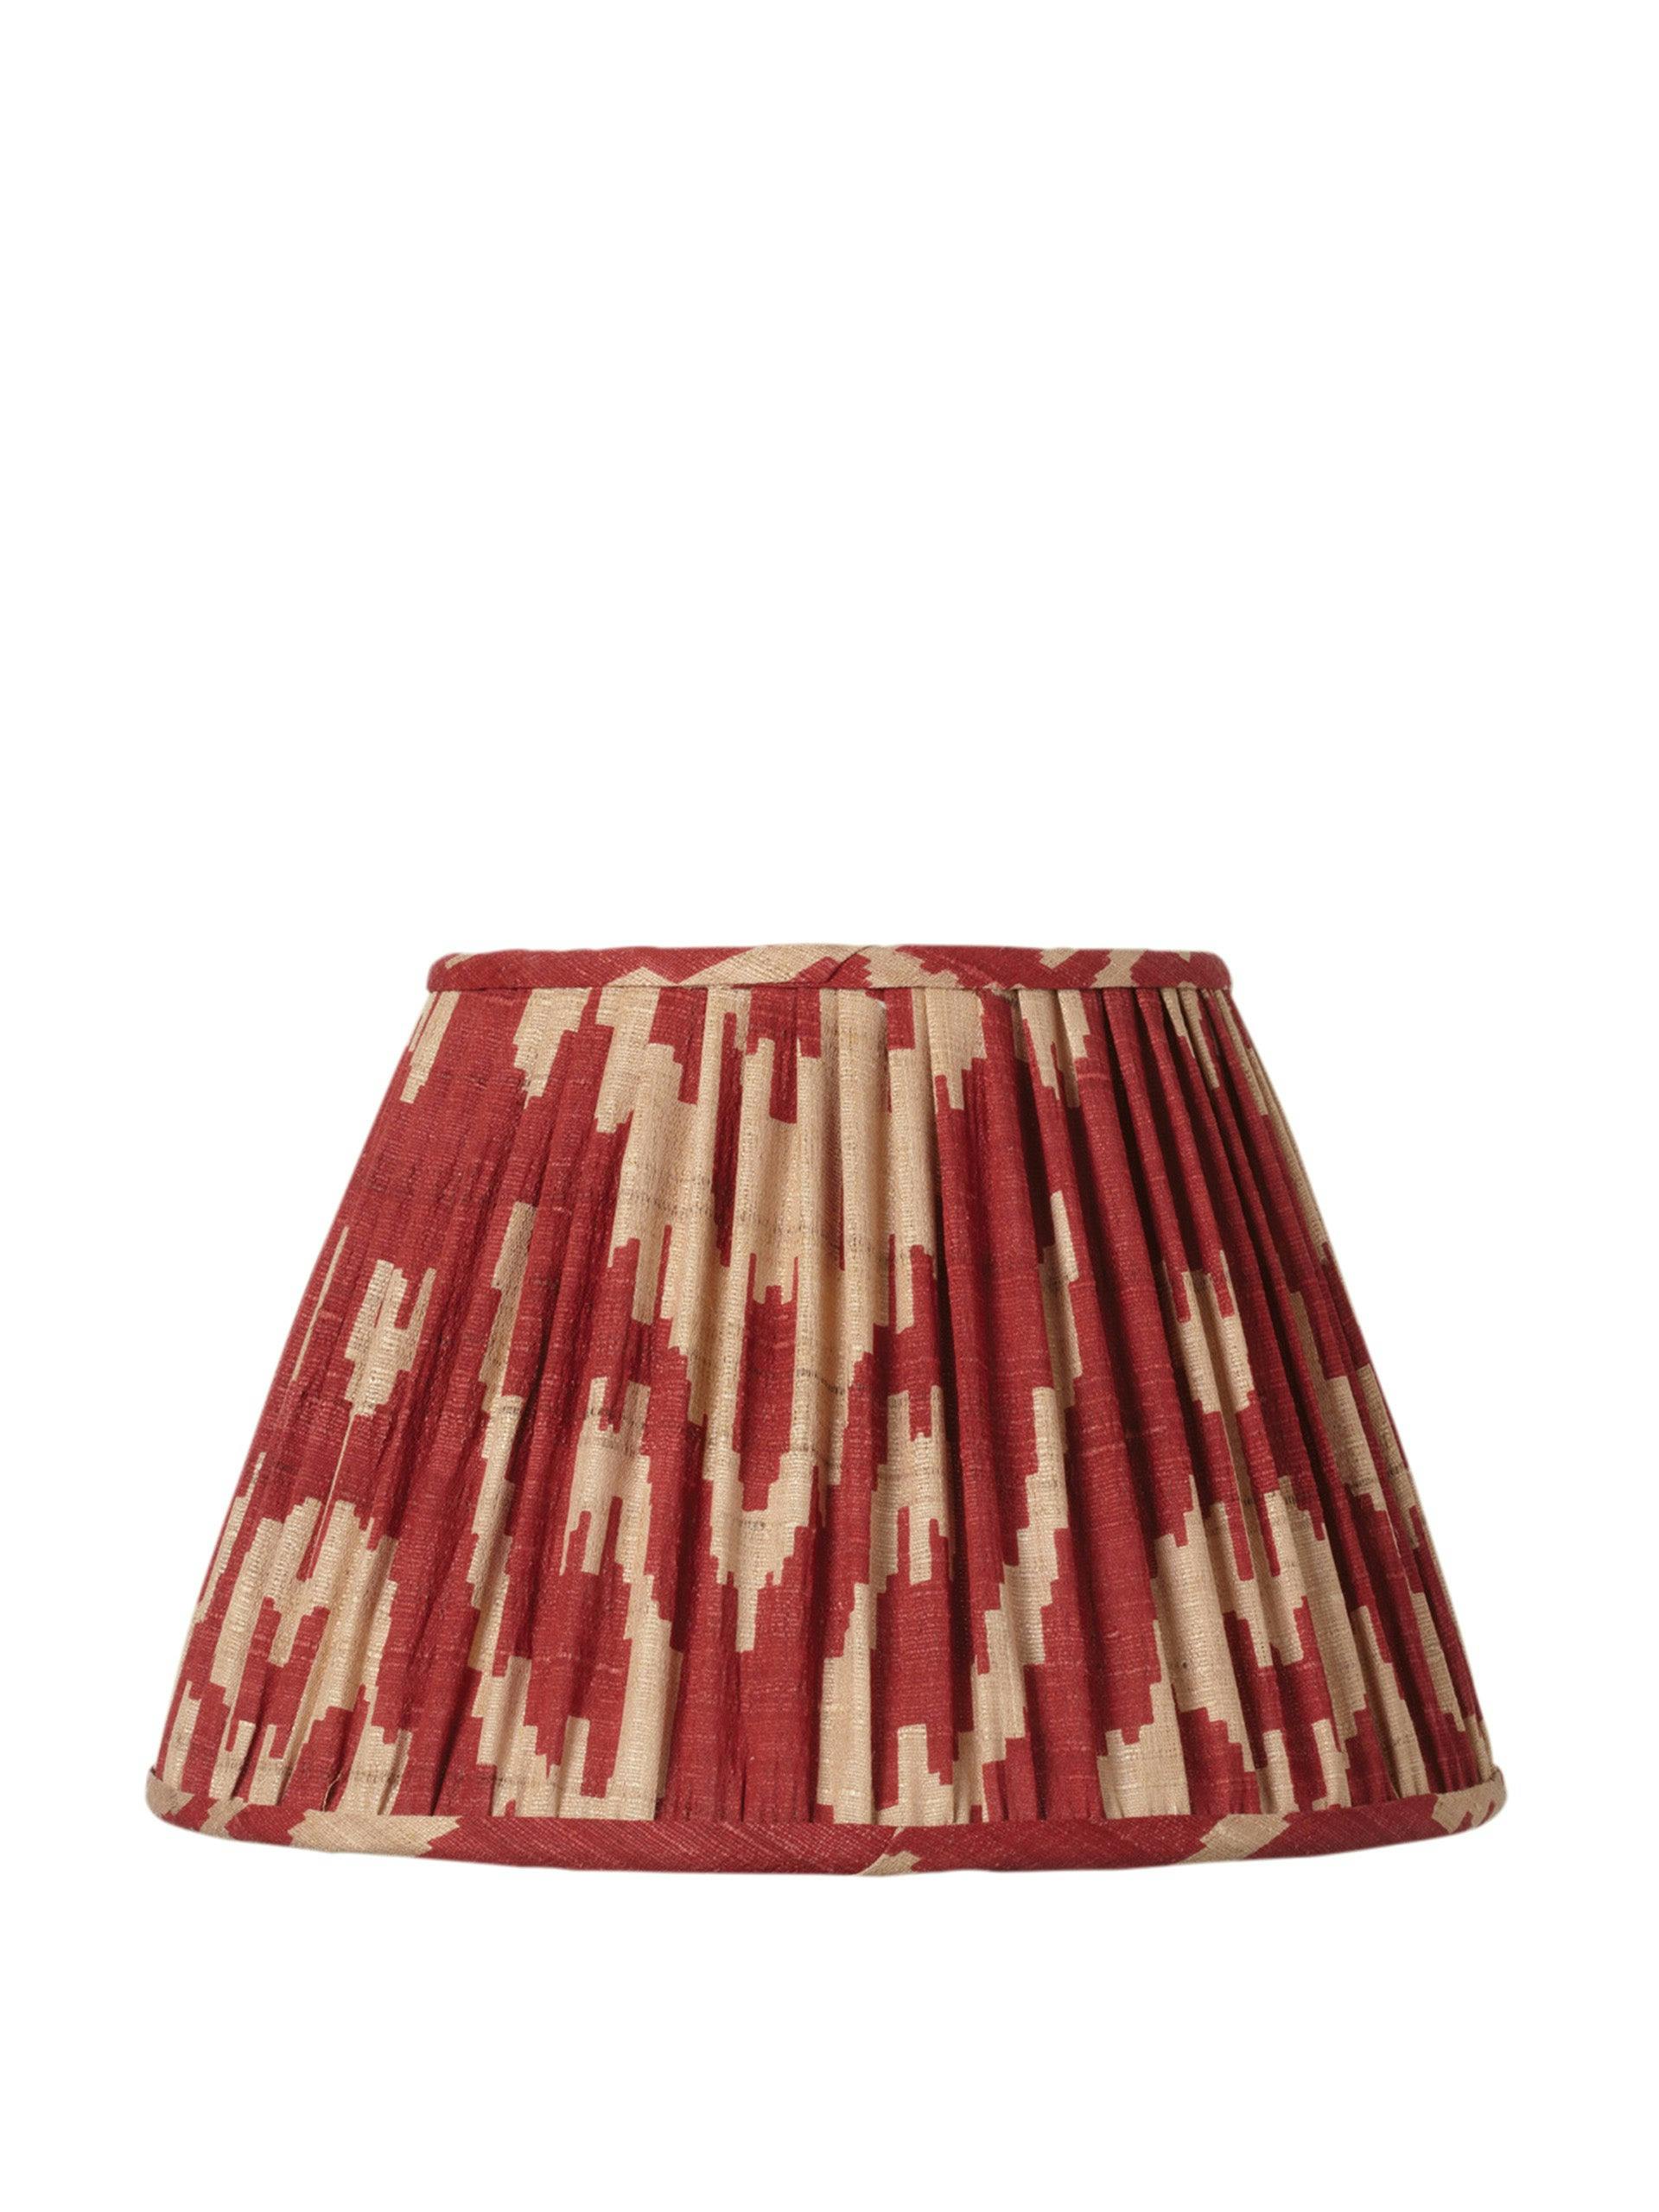 Red and cream pleated lampshade